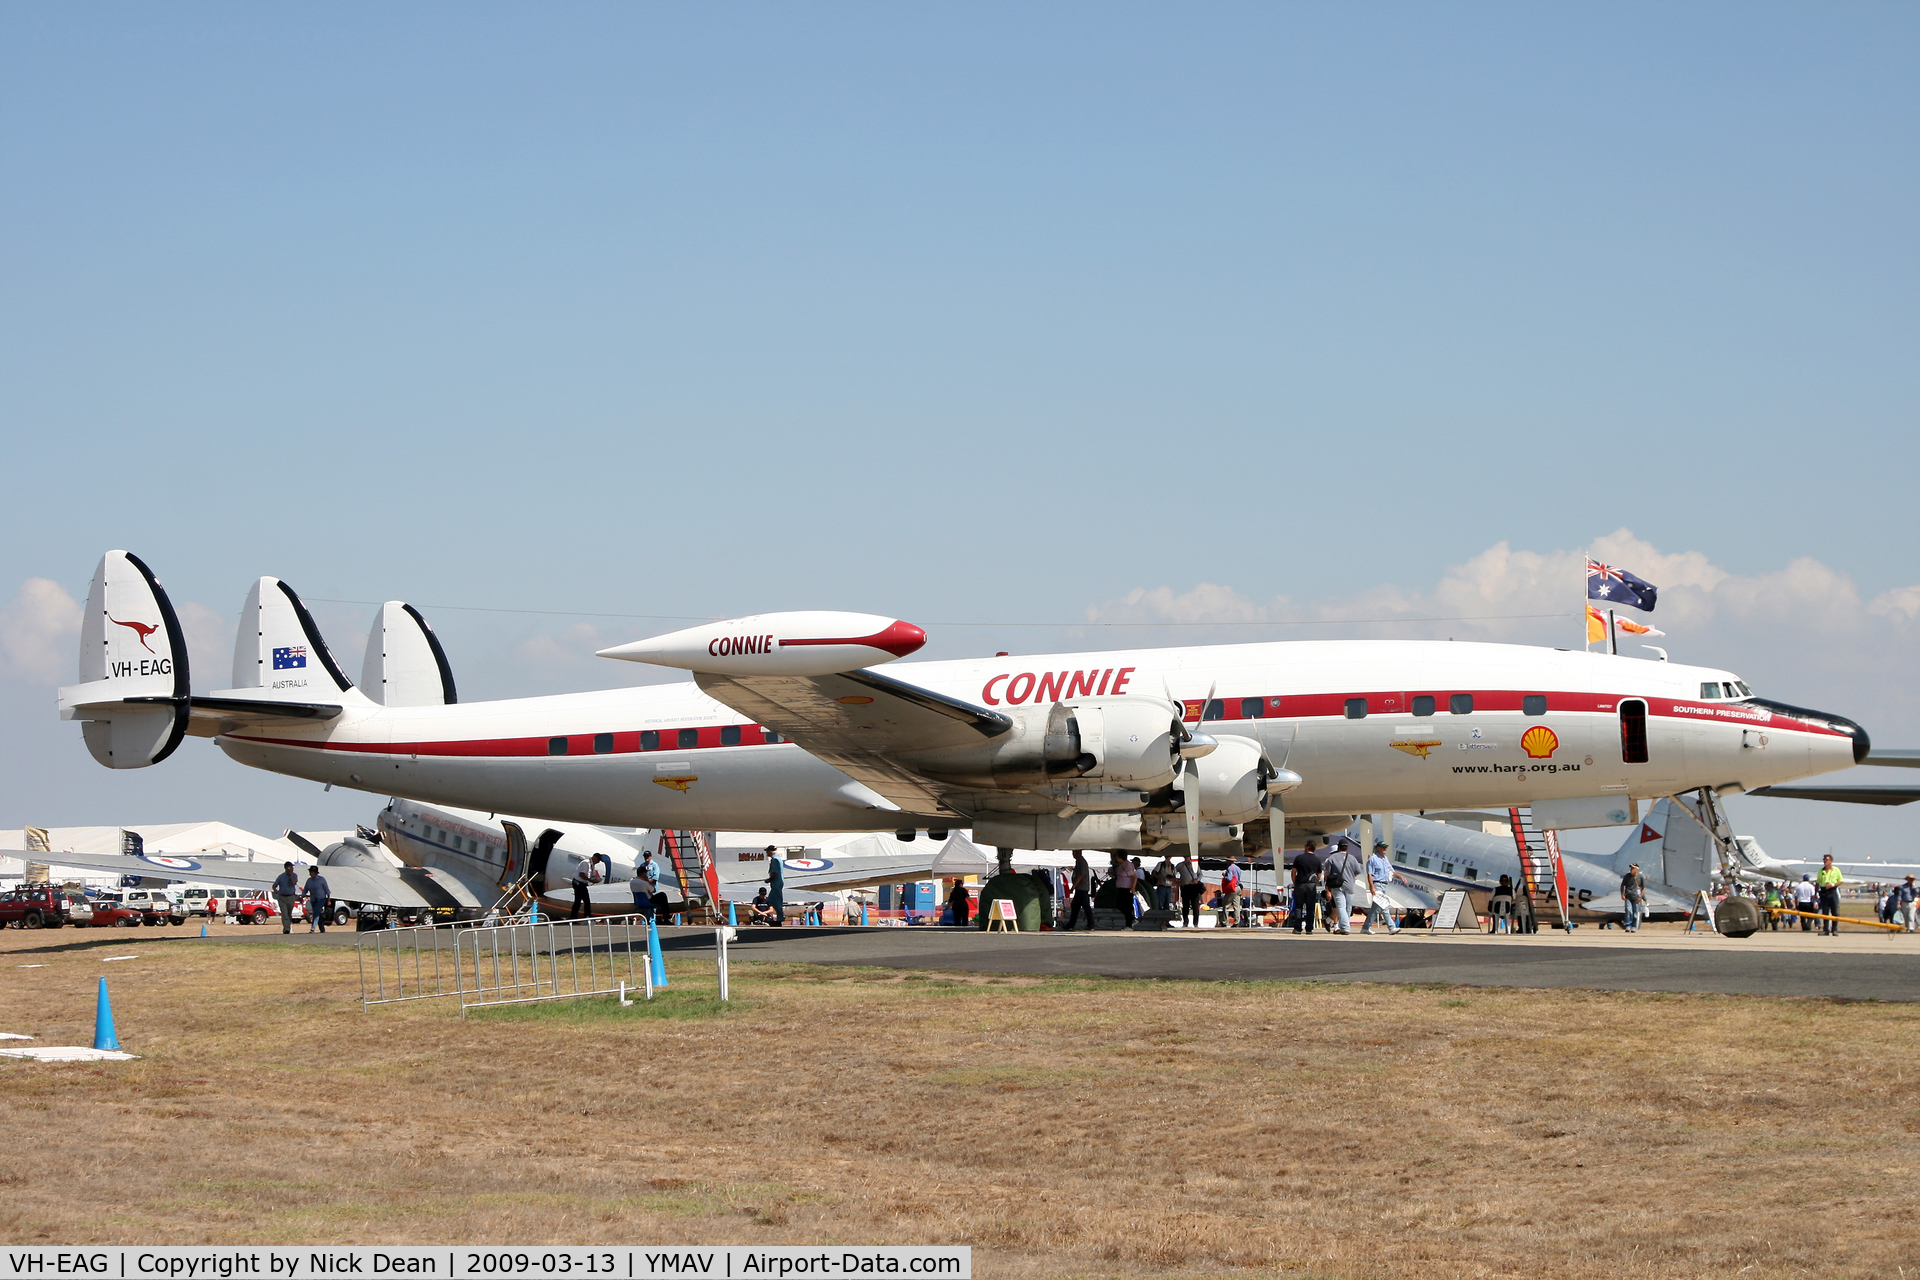 VH-EAG, 1955 Lockheed L-1049F Super Constellation C/N 4176, YMAV (The HARS Connie based at Wollongong NSW)